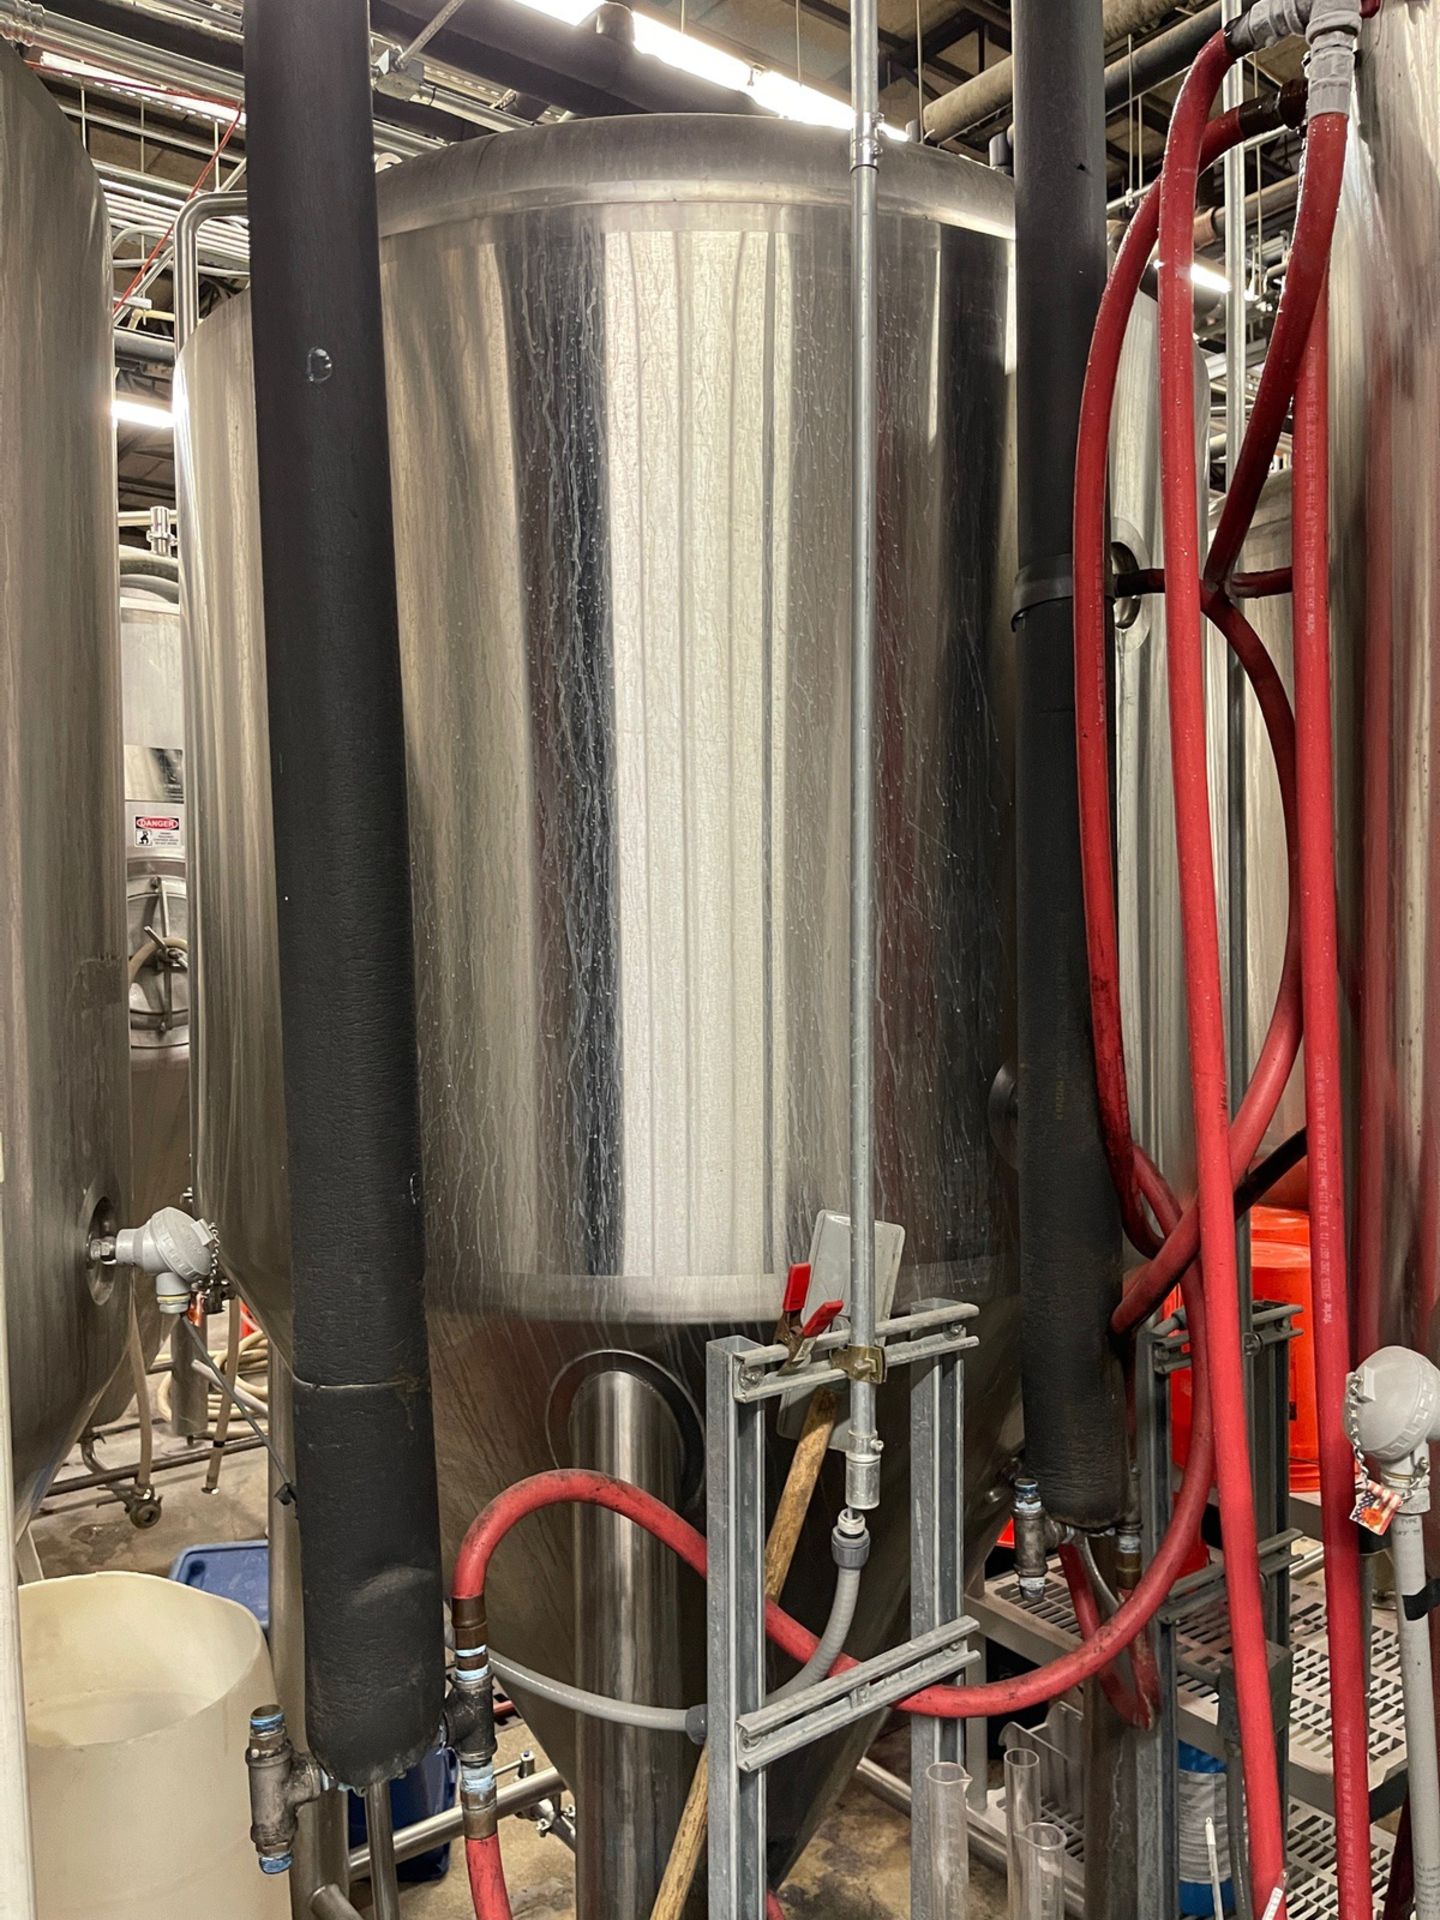 2013 ABS Commercial 20 BBL Fermentation Vessel, Cone Bottom, Glycol Jacketed, Mando | Rig Fee $800 - Image 2 of 2